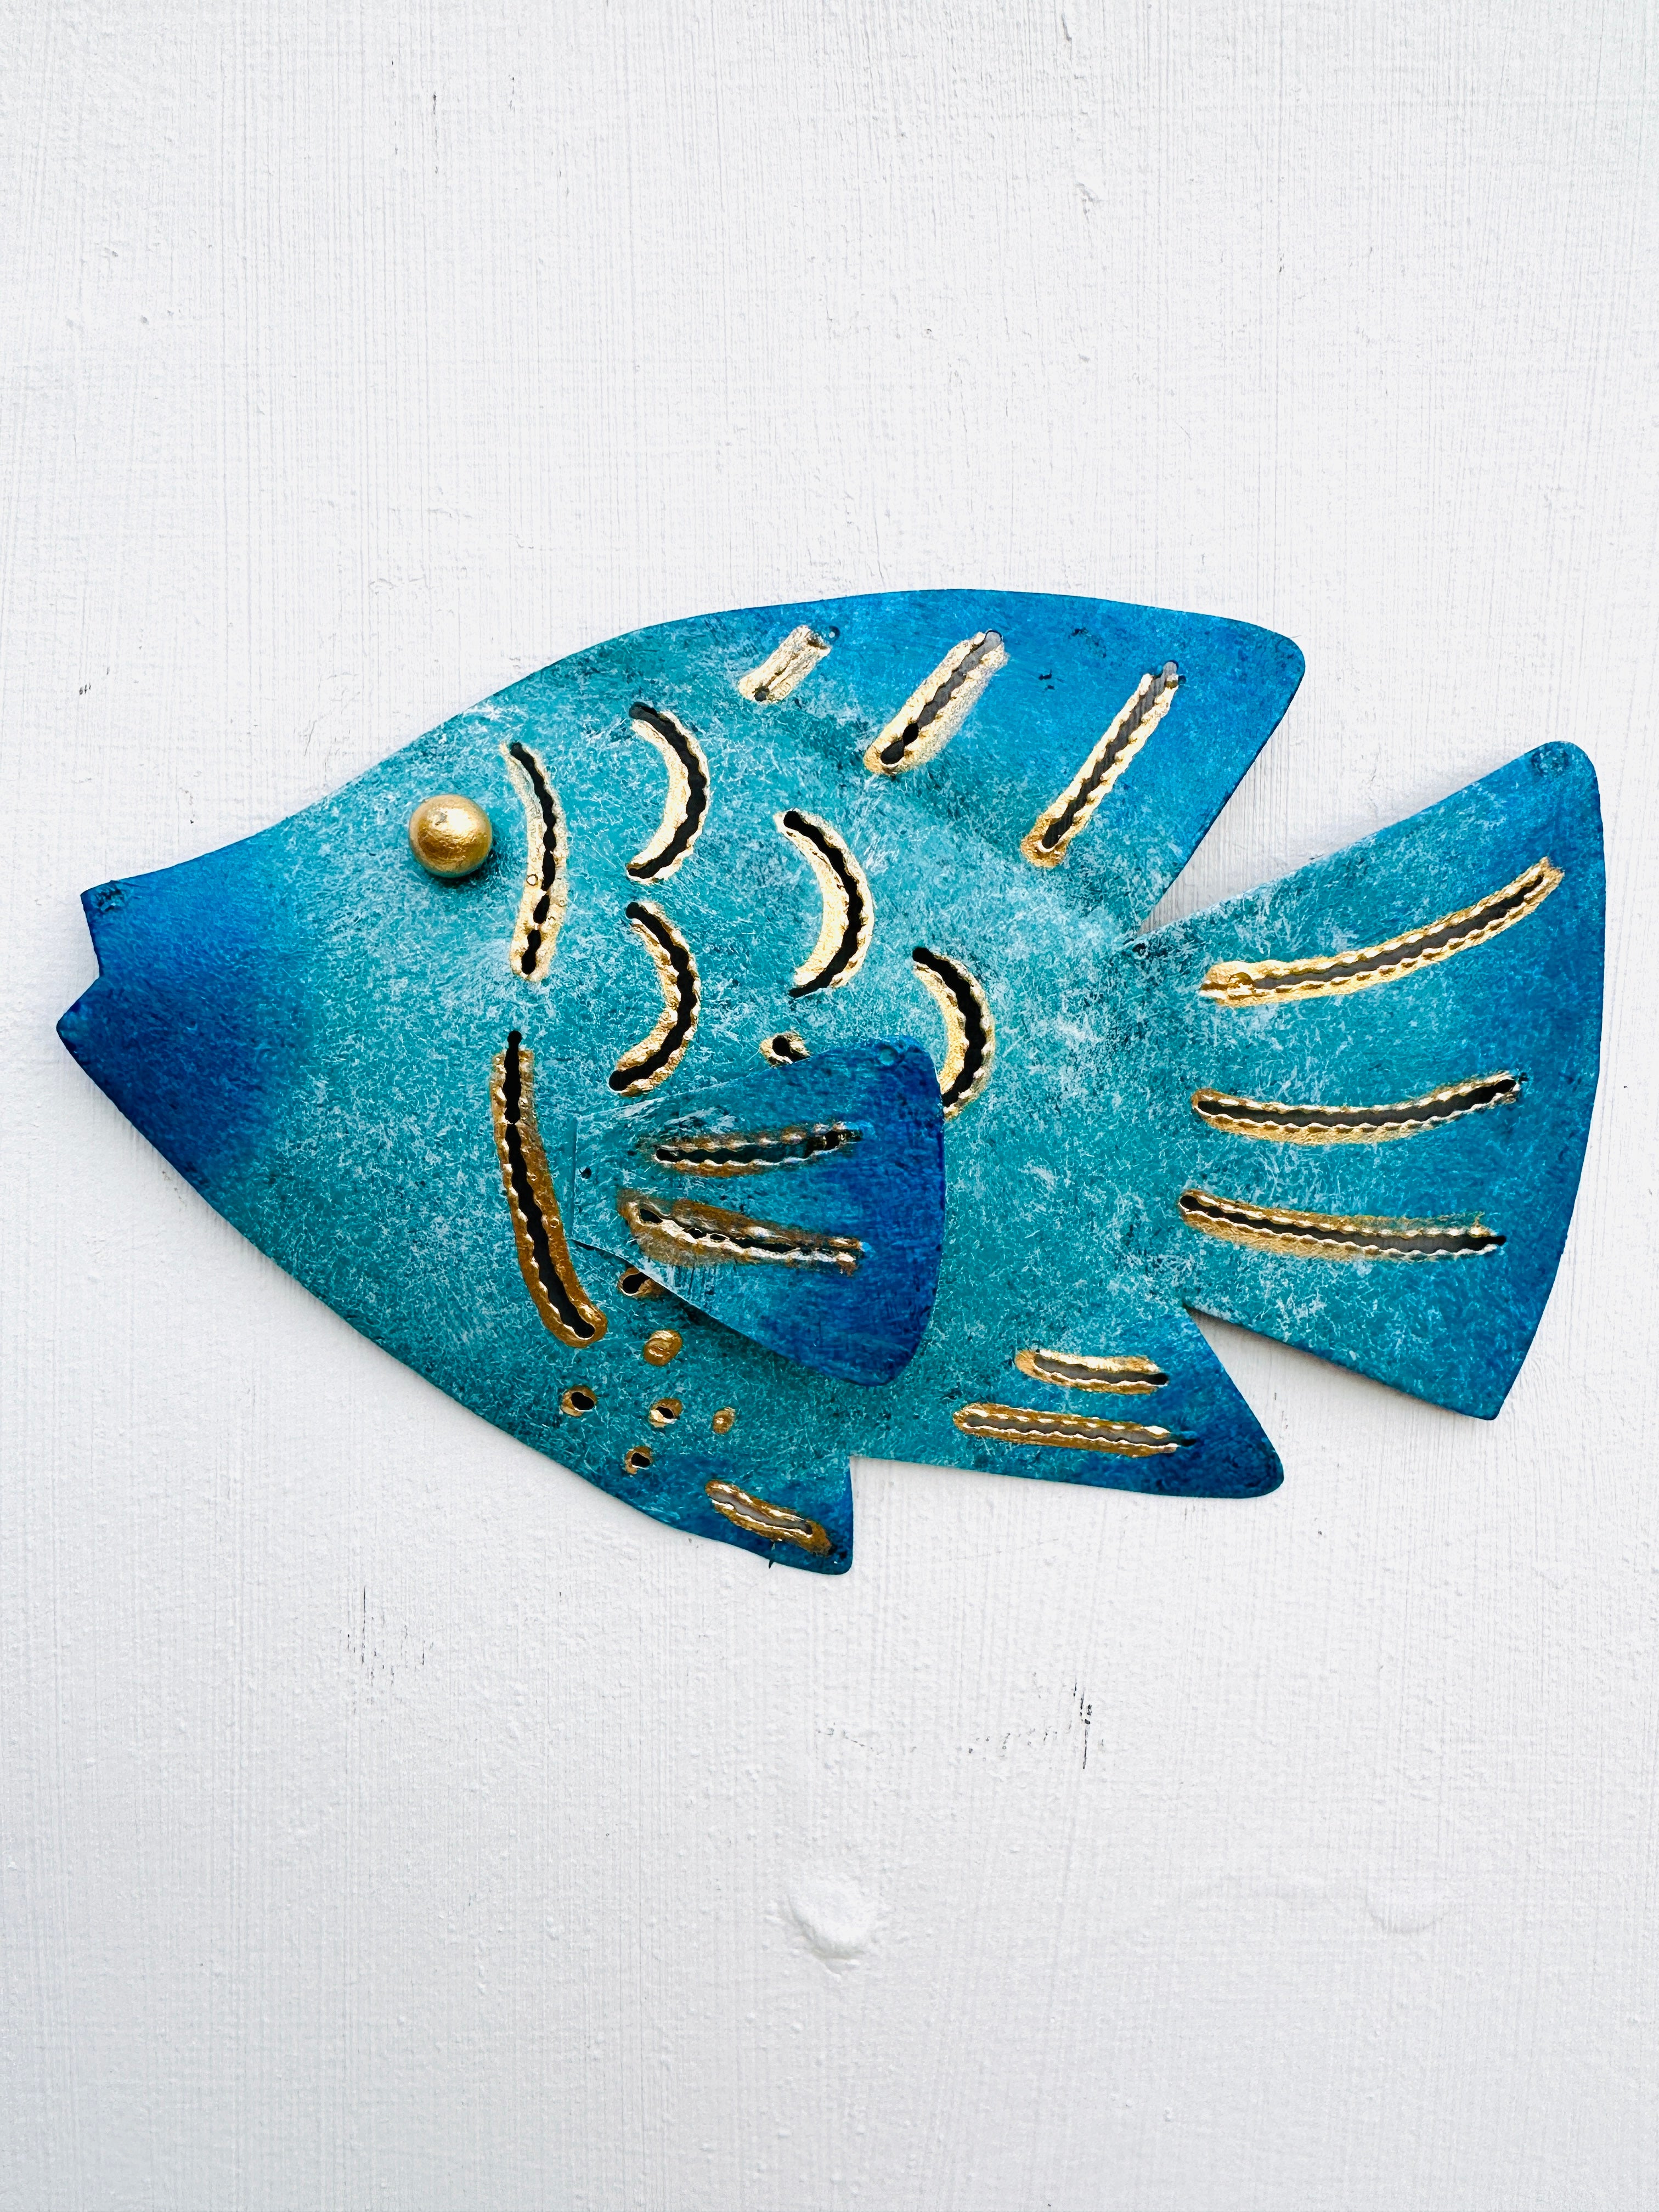 front view of metal reef fish in blue